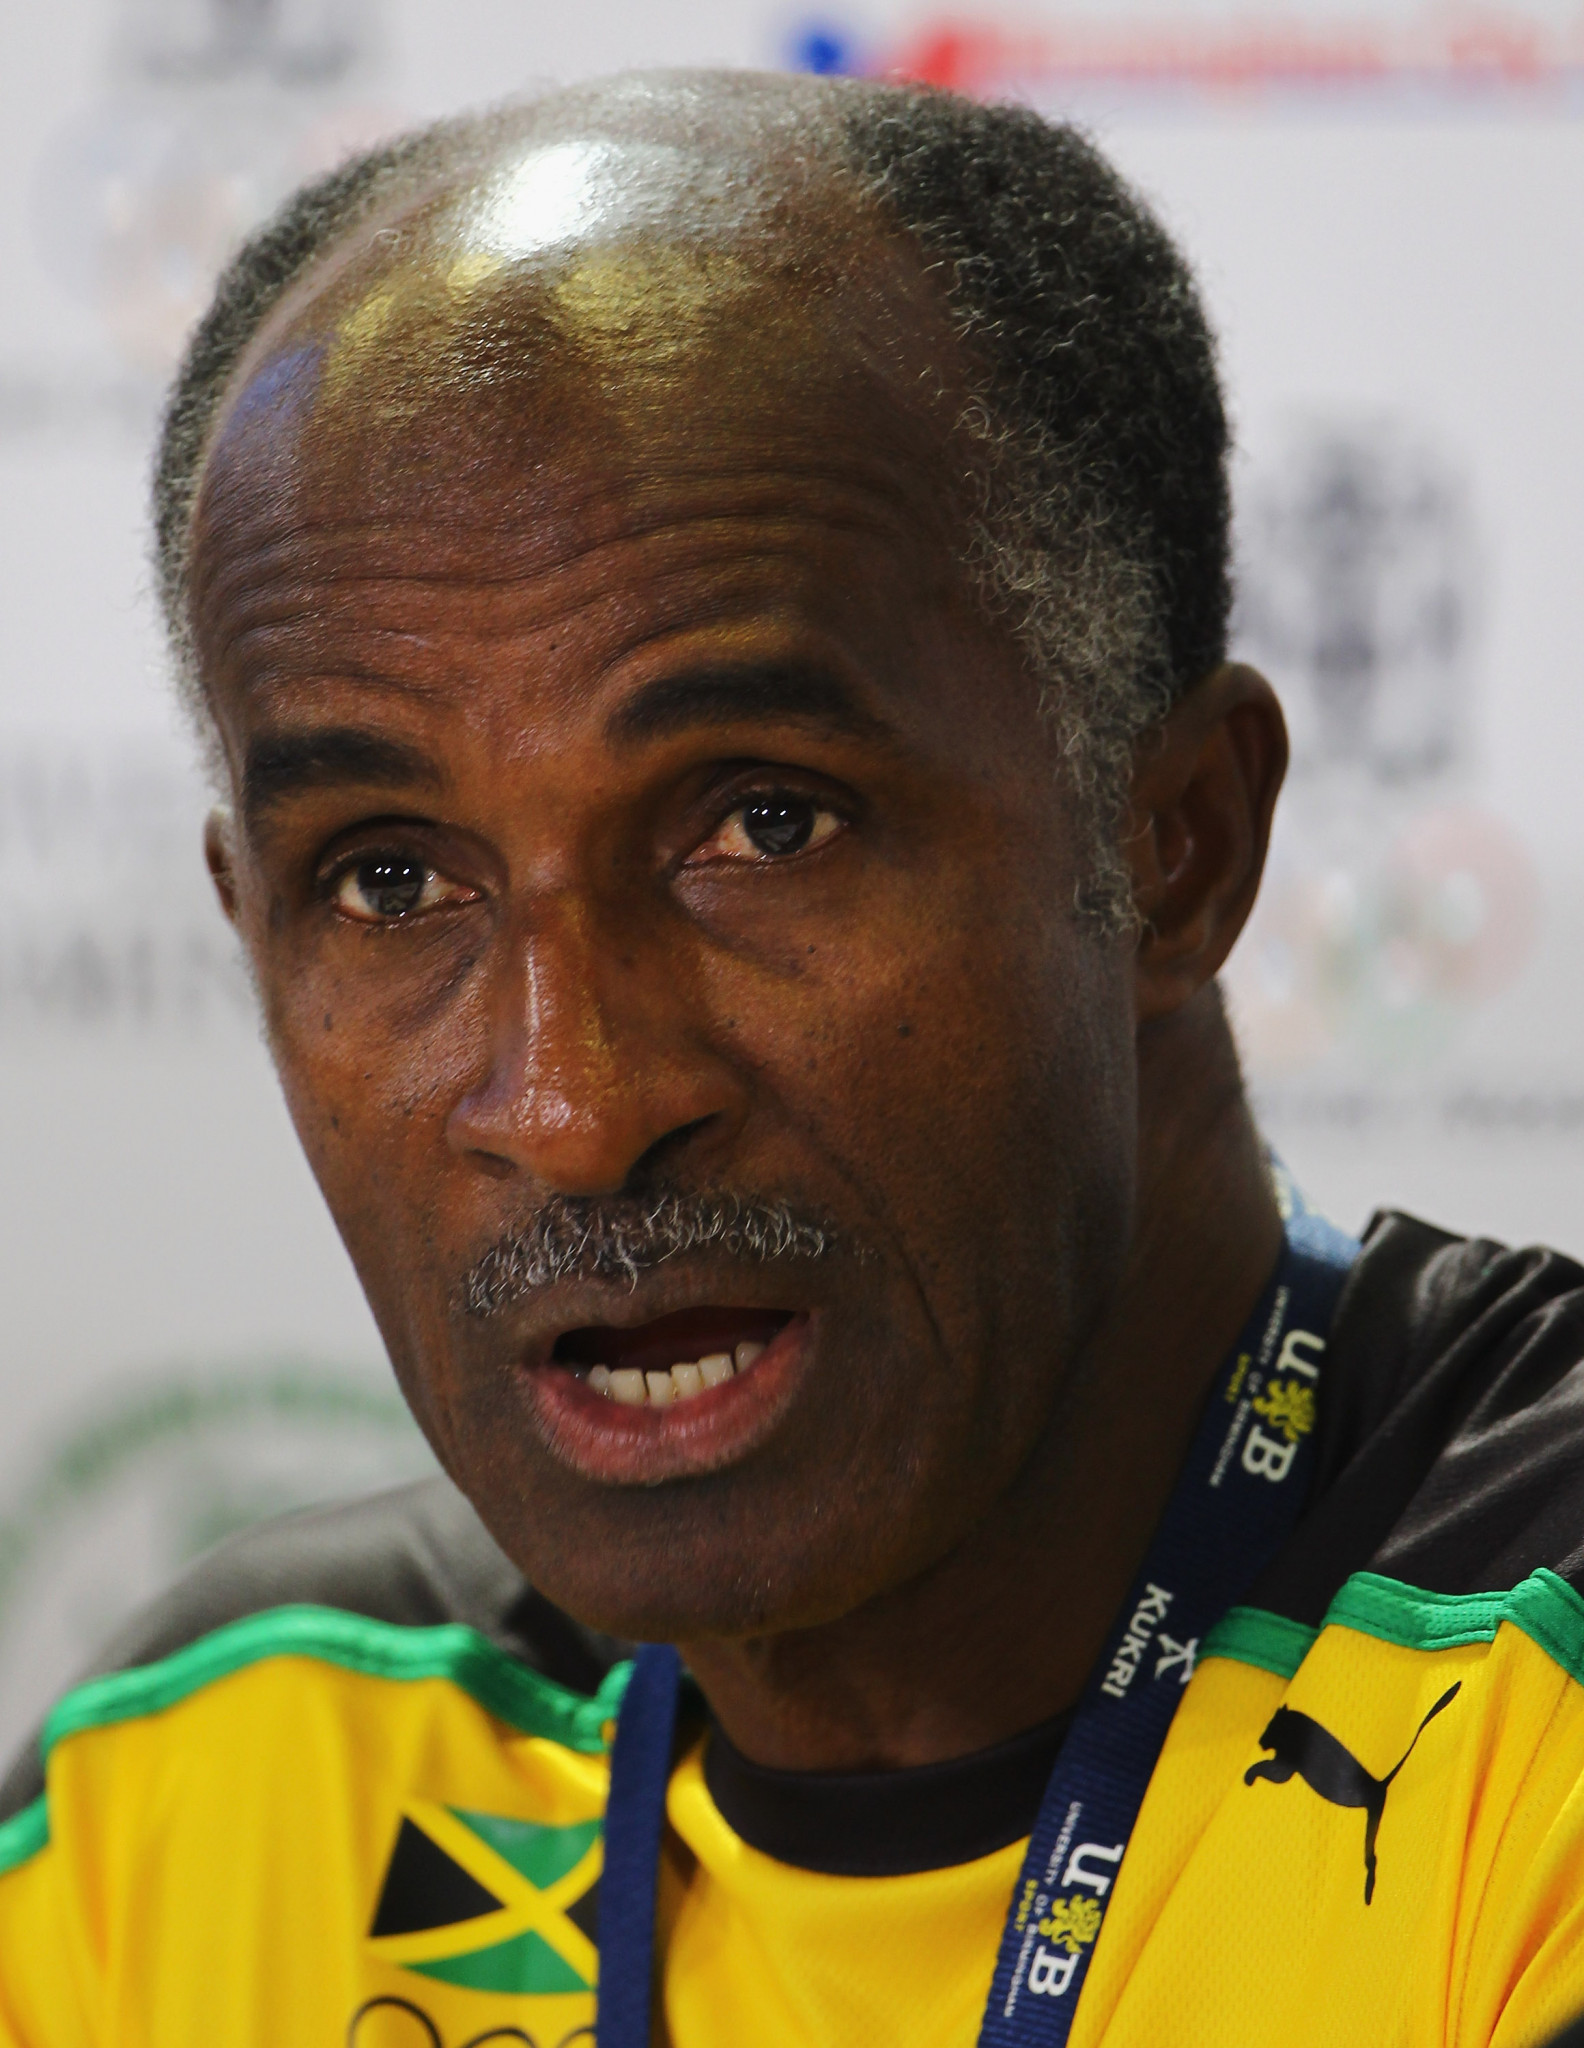 Olympic gold medallist Quarrie seeking election as President of JAAA